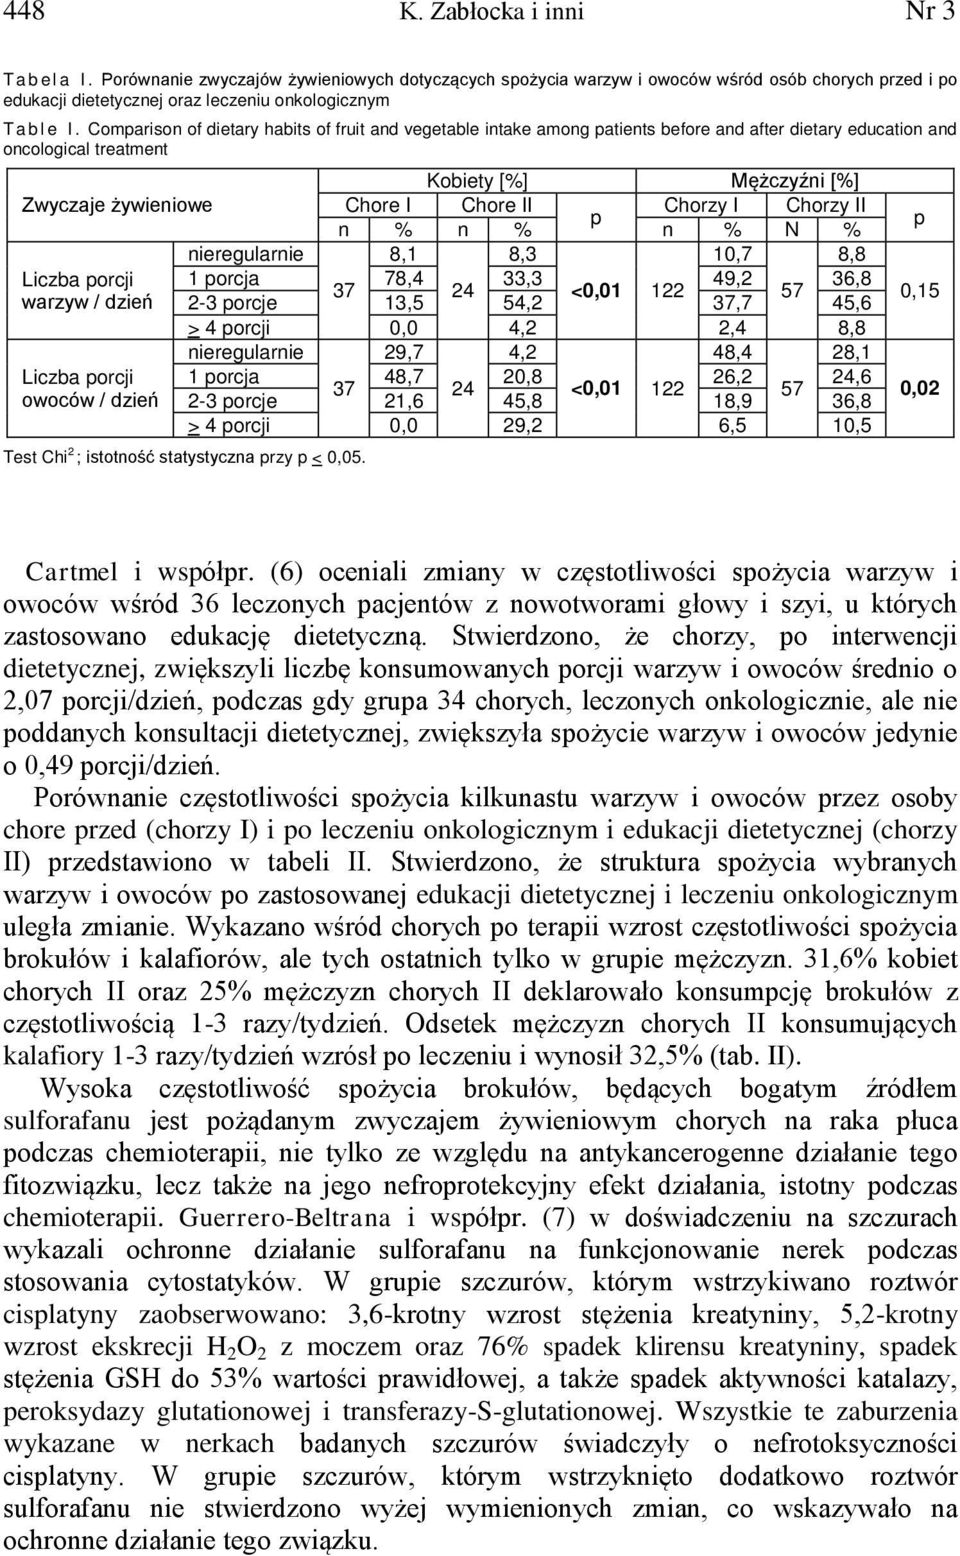 Comparison of dietary habits of fruit and vegetable intake among patients before and after dietary education and oncological treatment Kobiety [%] Mężczyźni [%] Zwyczaje żywieniowe Chore I Chore II